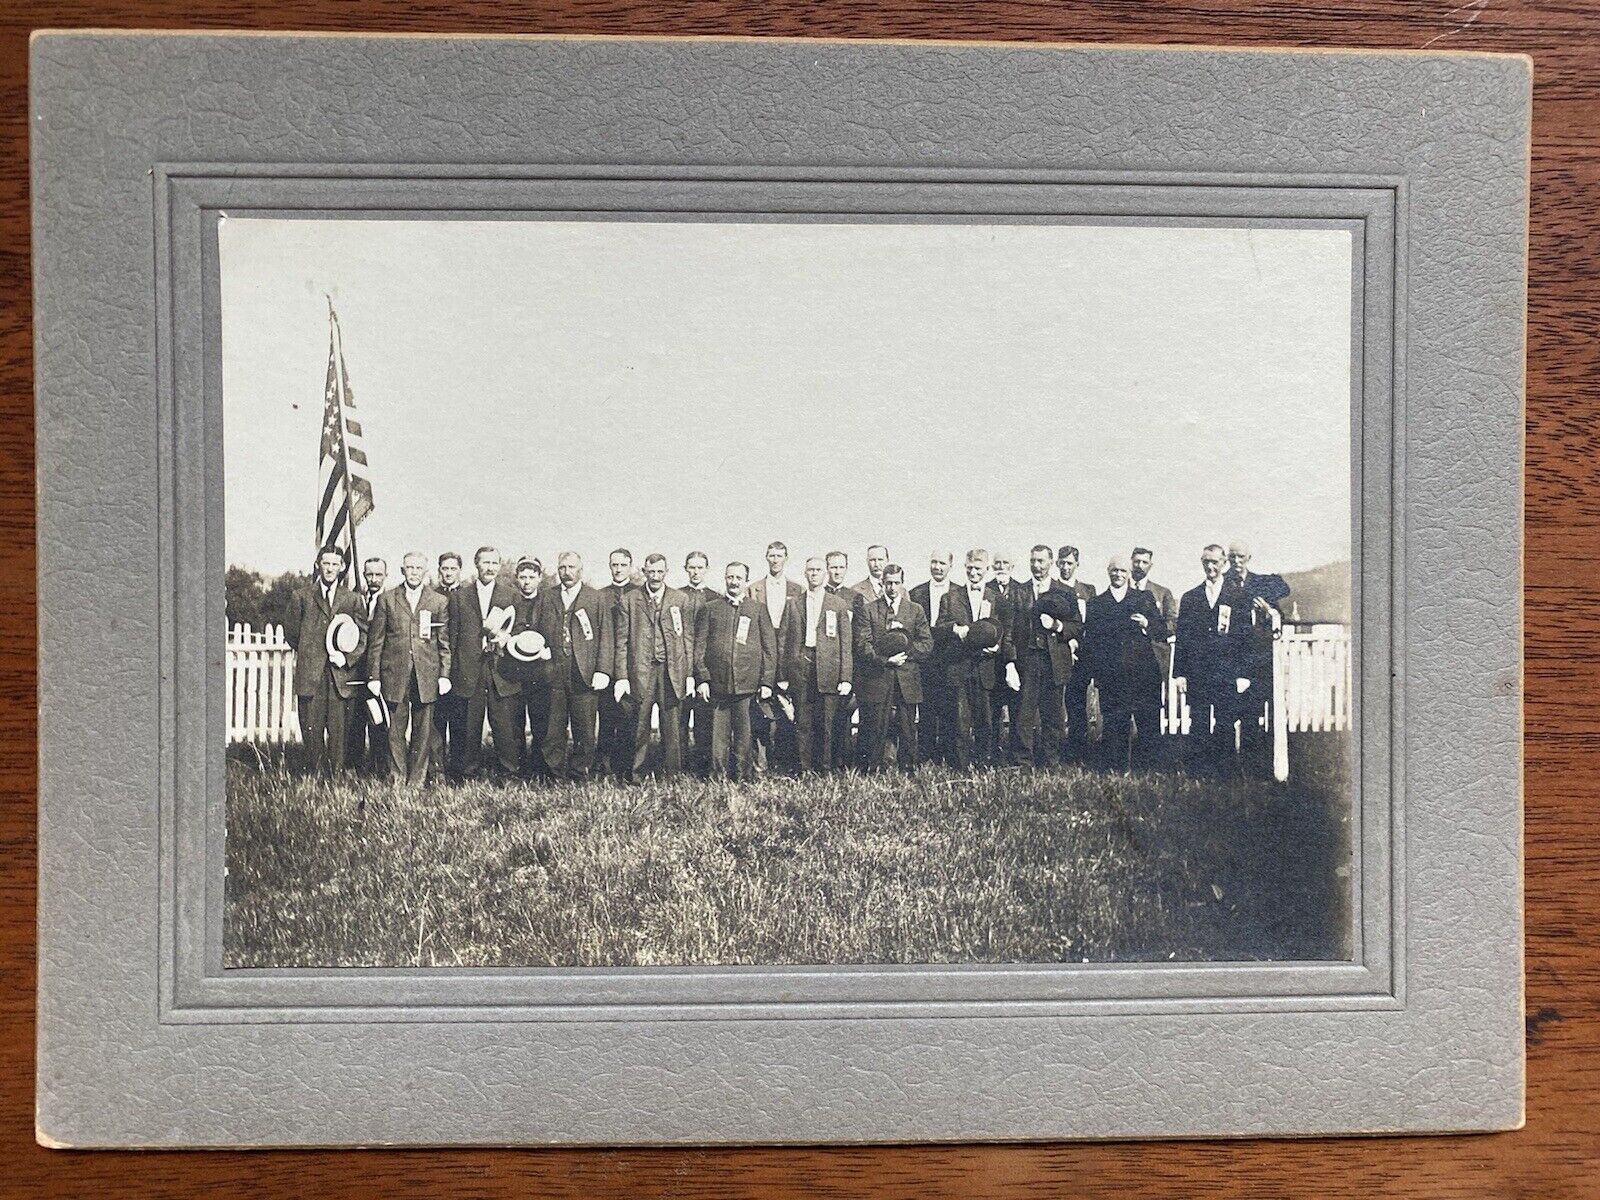 New Hampshire Knights of Pythias Identified Group of Men Antique Vintage Photo